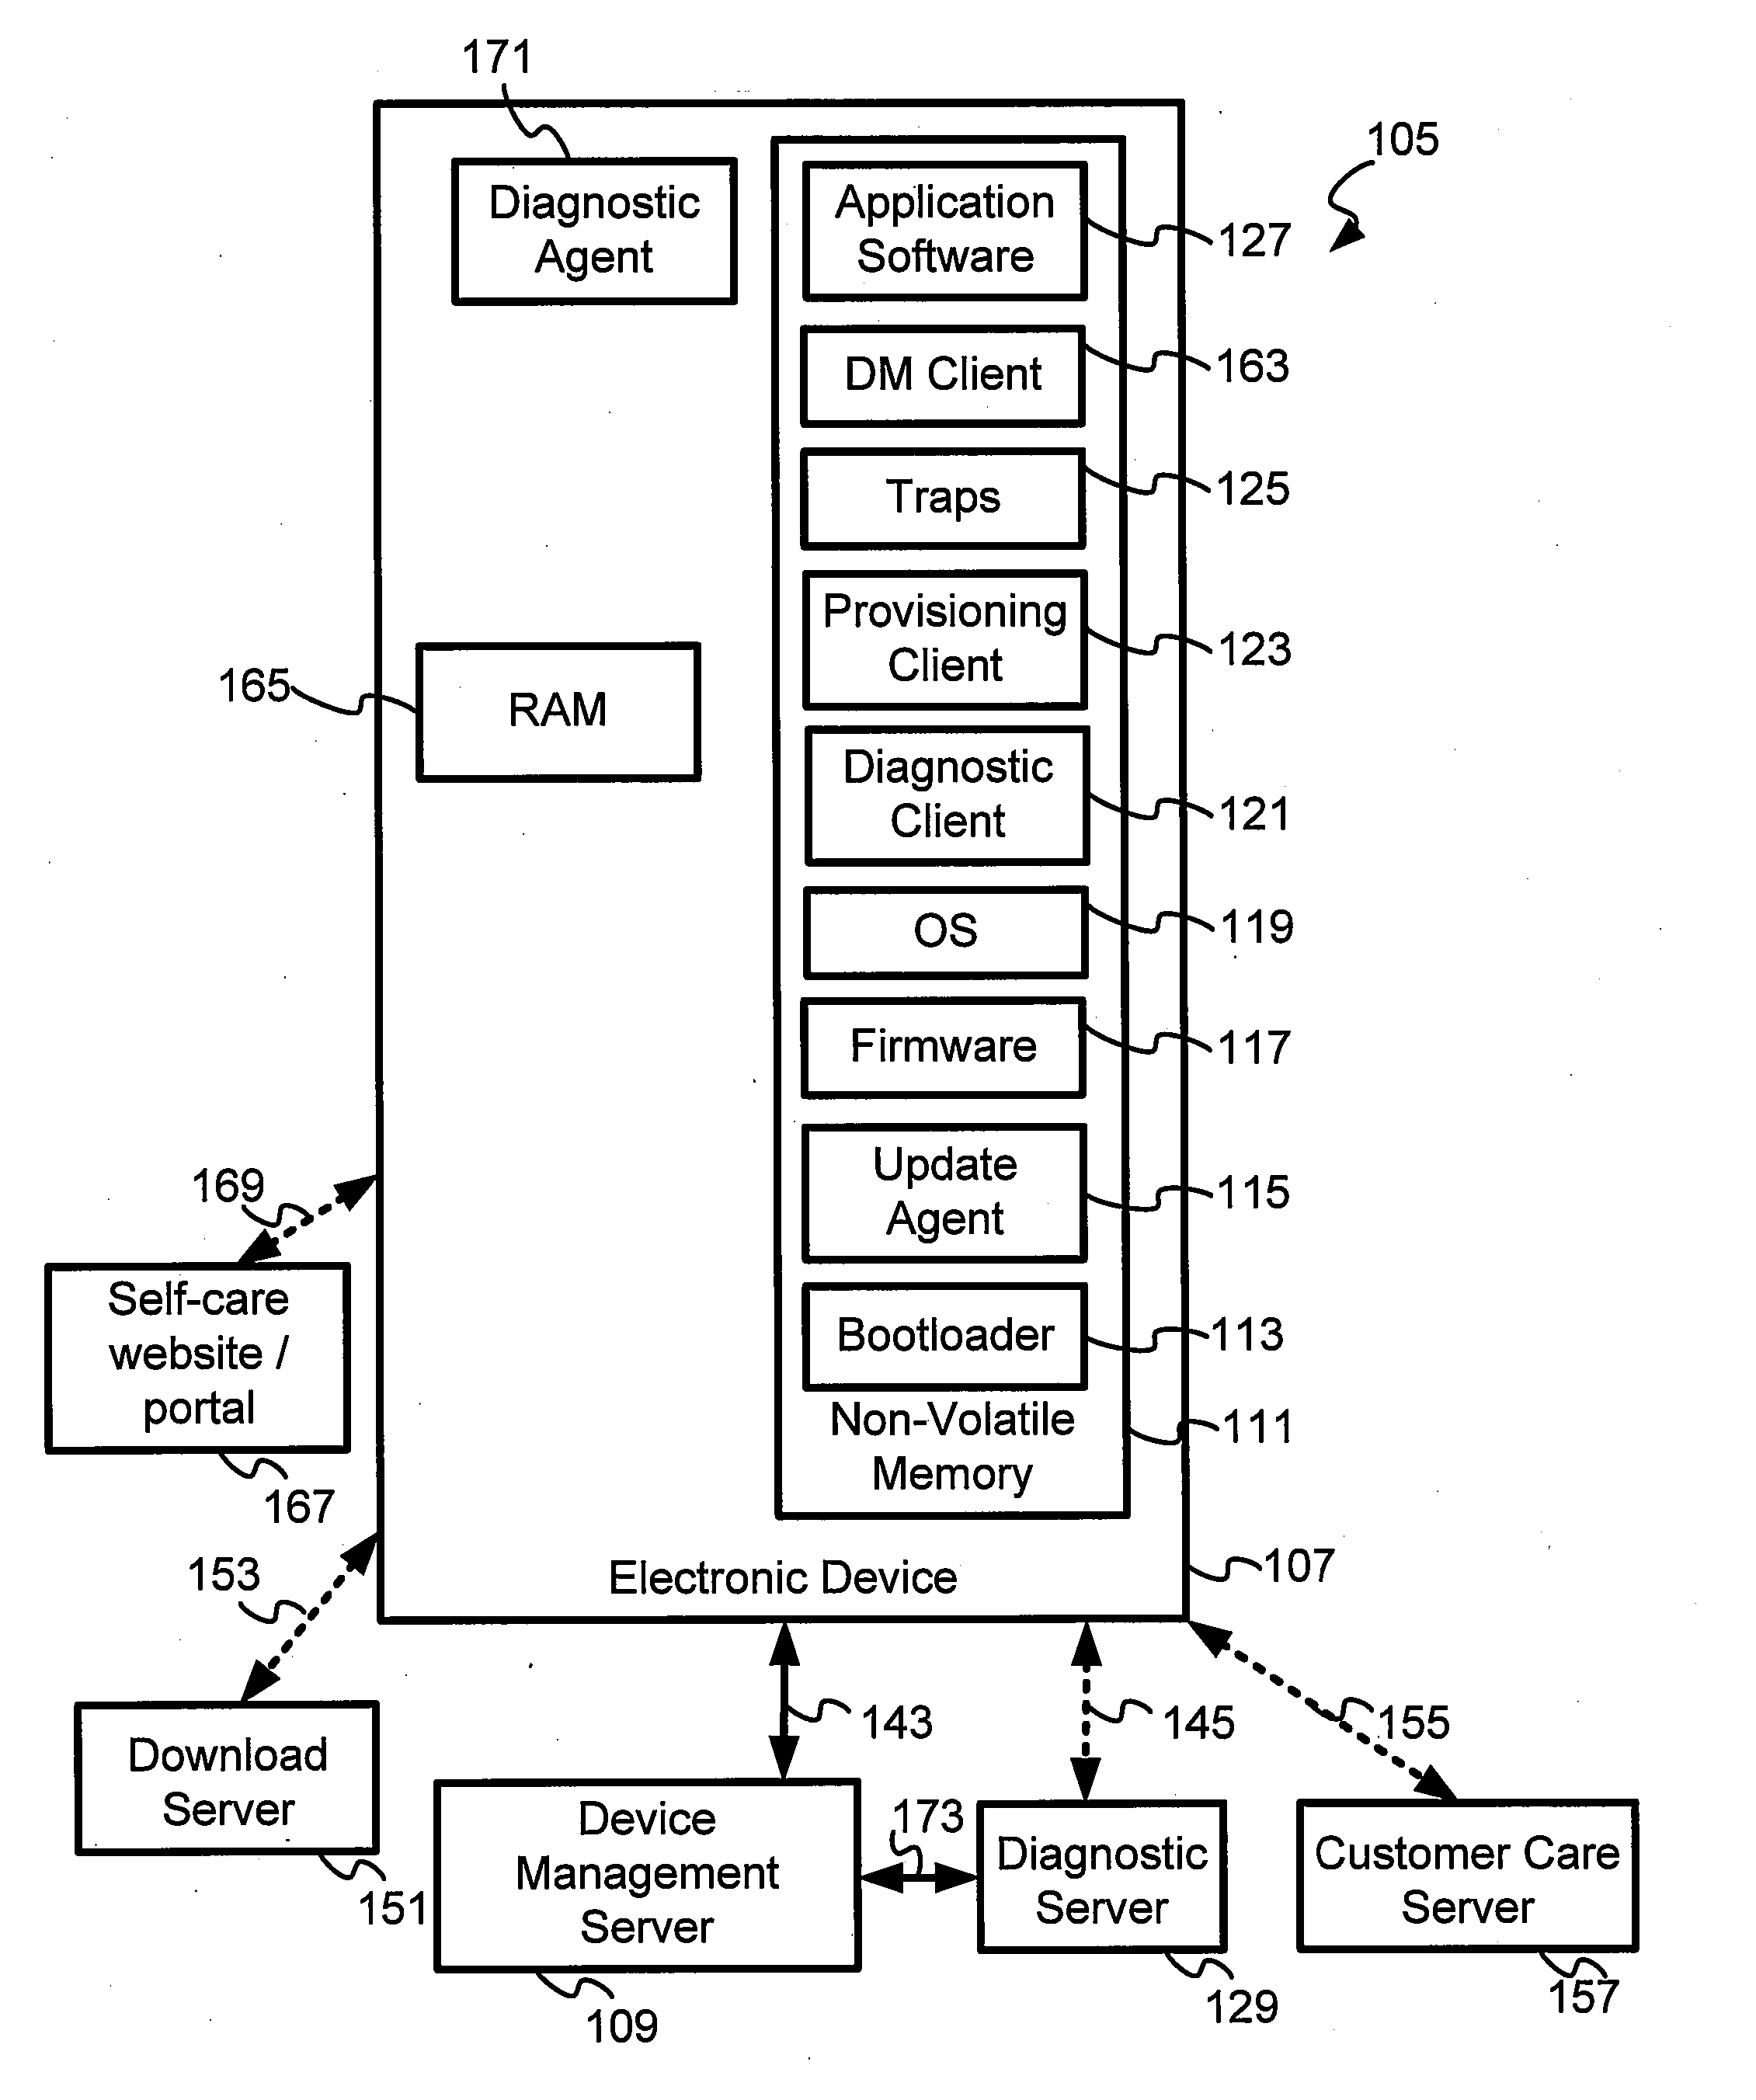 Diagnostics And Monitoring Services In A Mobile Network For A Mobile Device